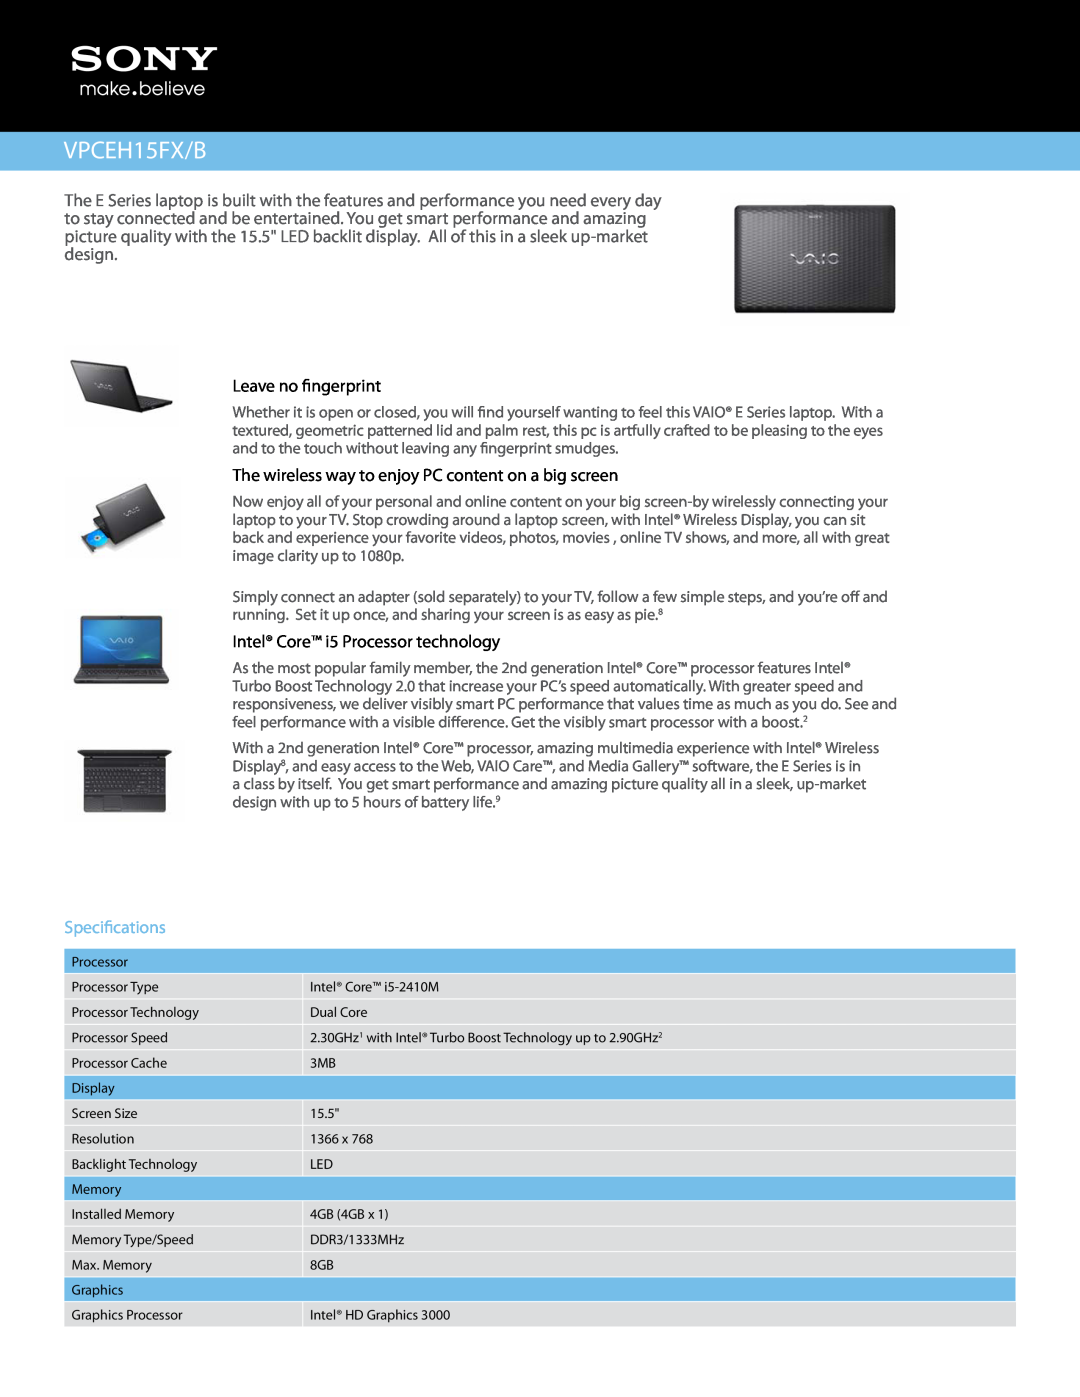 Sony VPCEH15FX/B manual Leave no fingerprint, The wireless way to enjoy PC content on a big screen, Specifications 